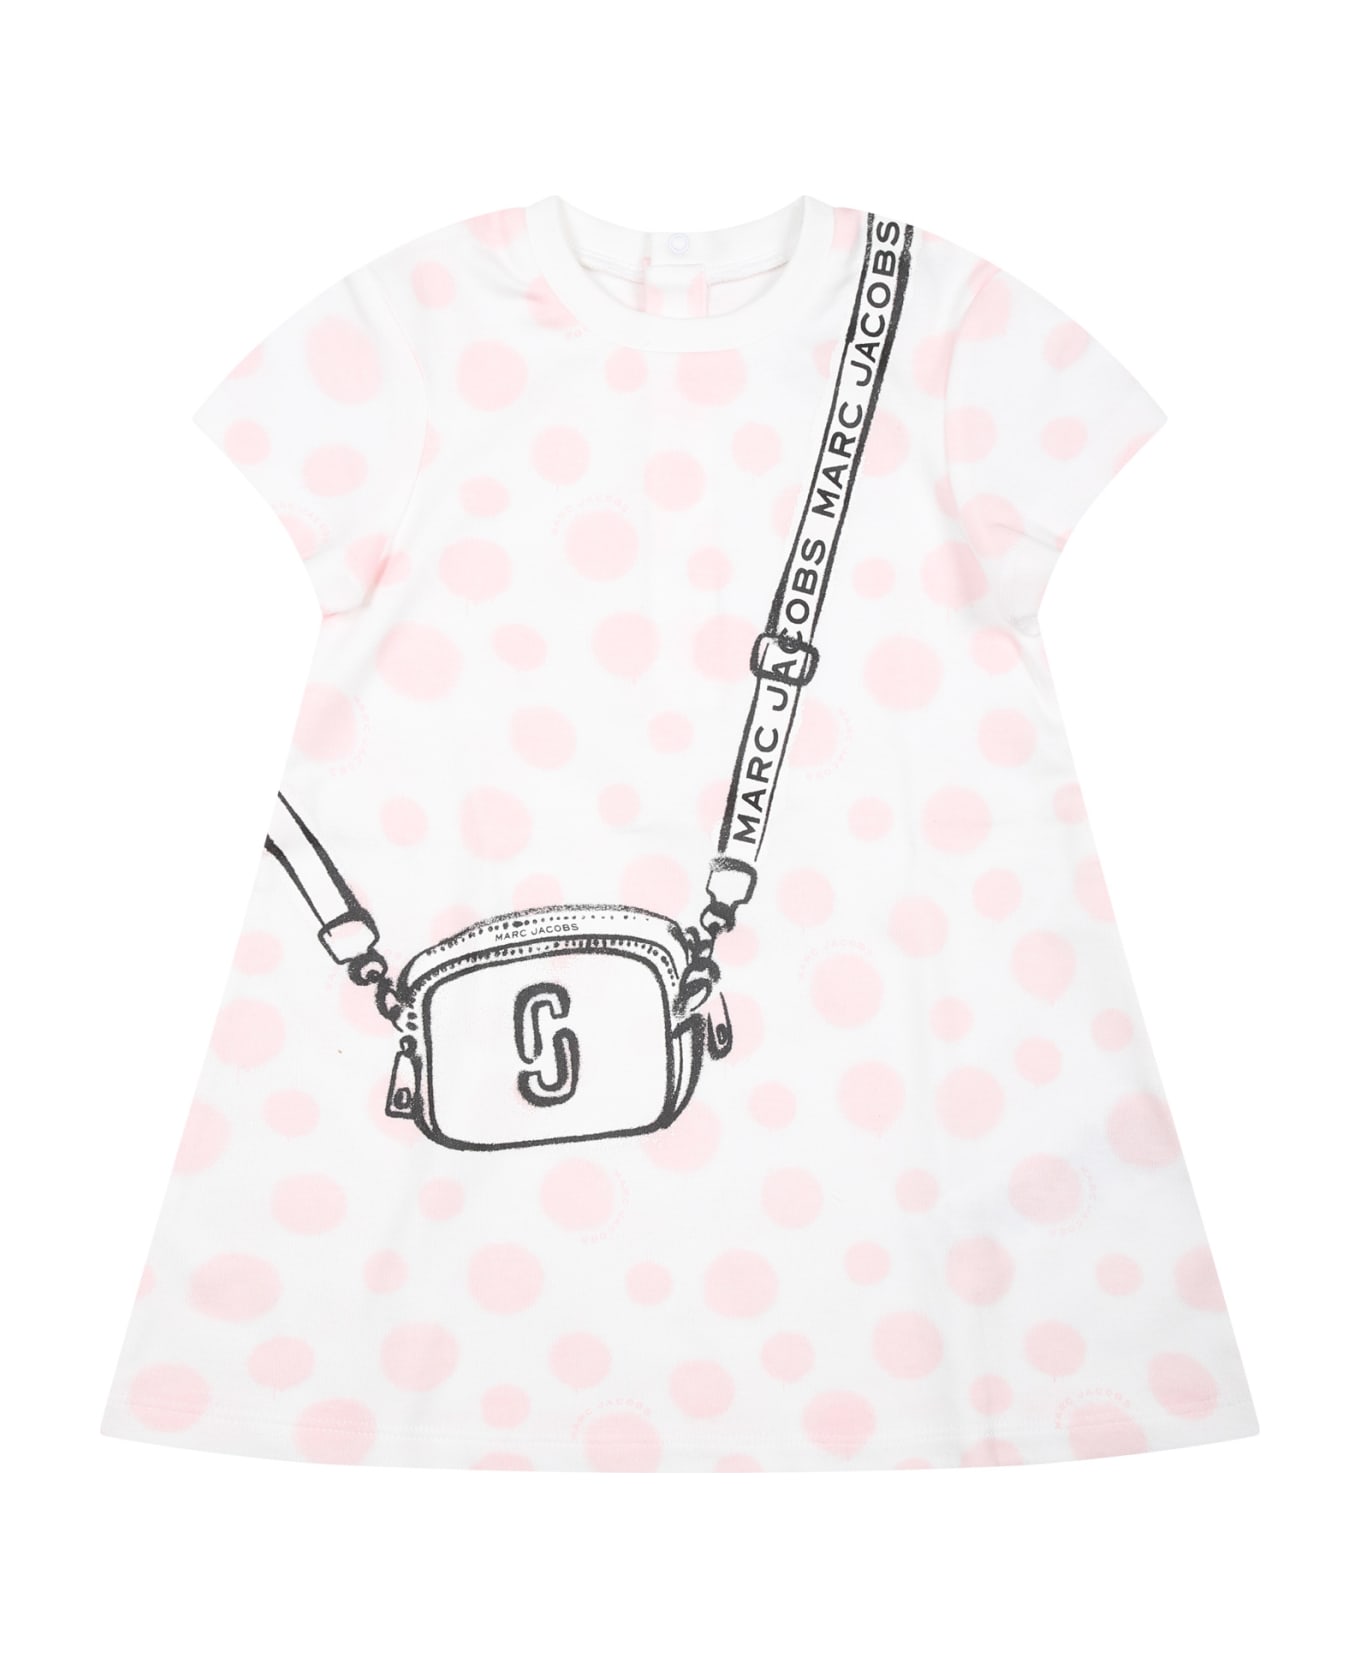 Little Marc Jacobs White Dress For Baby Girl With Print And Polka Dots - White